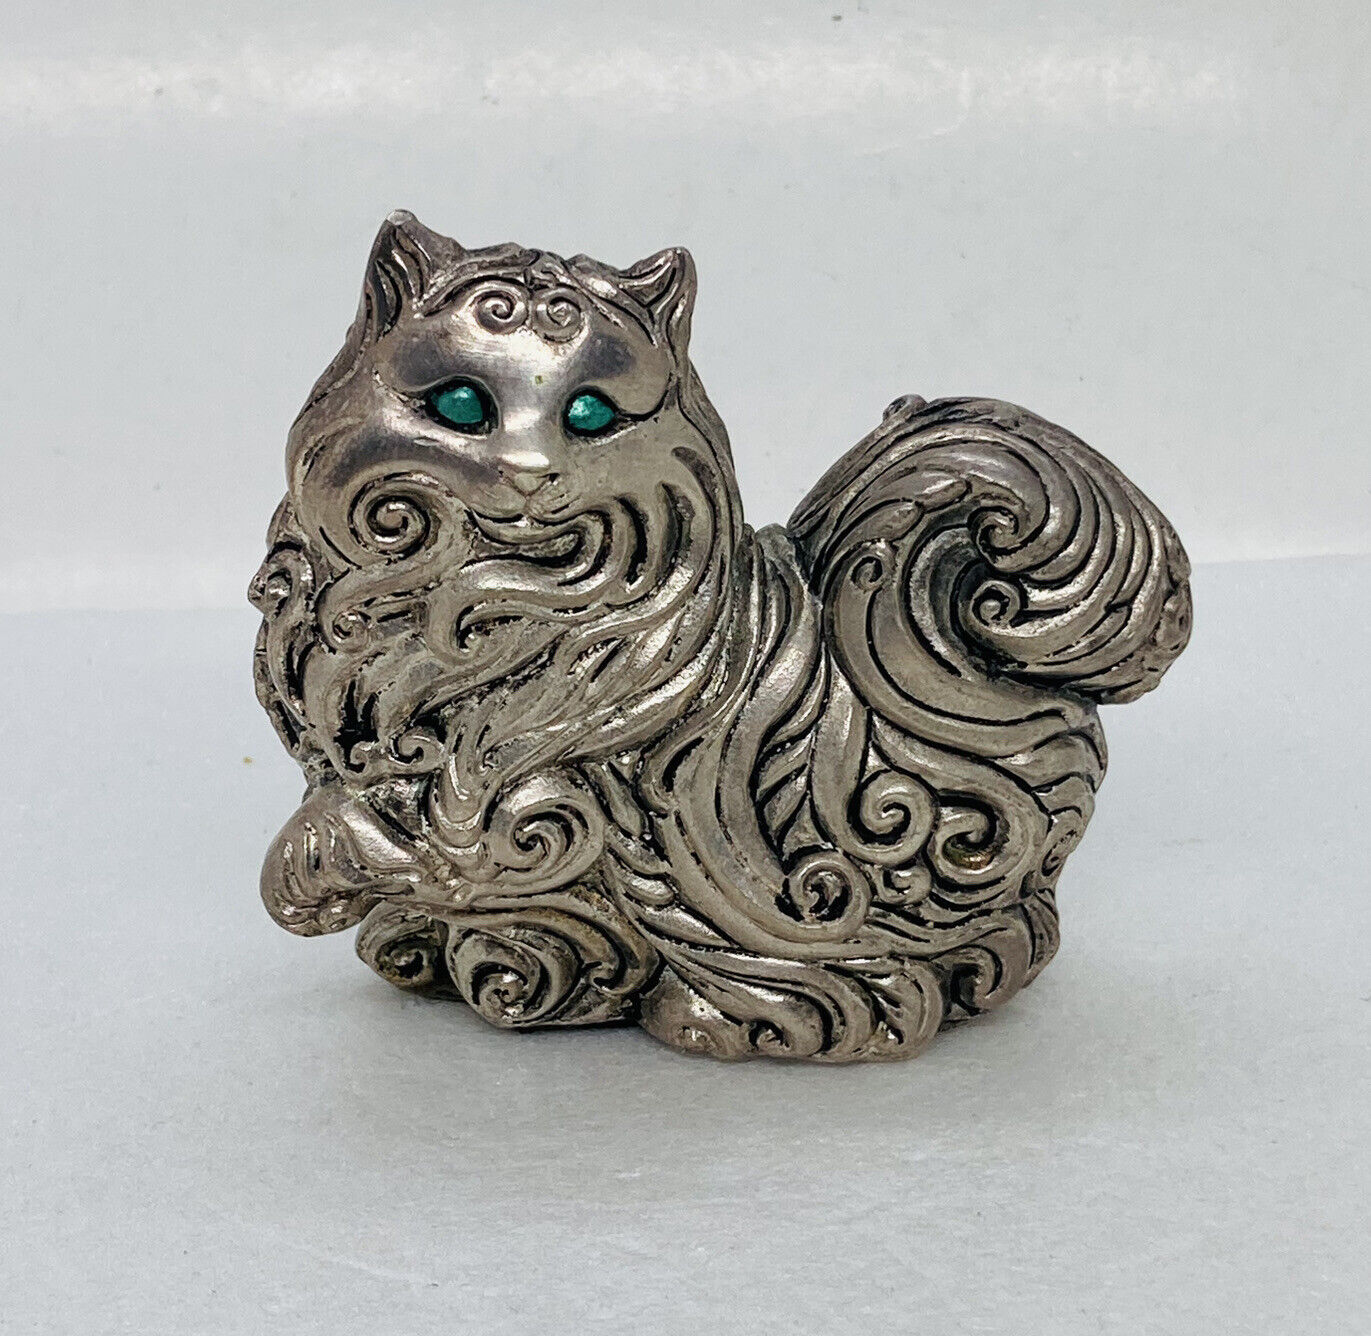 Rare The Franklin Mint Cat Paperweight 3” Unique Heavy Metal Art Figurine O